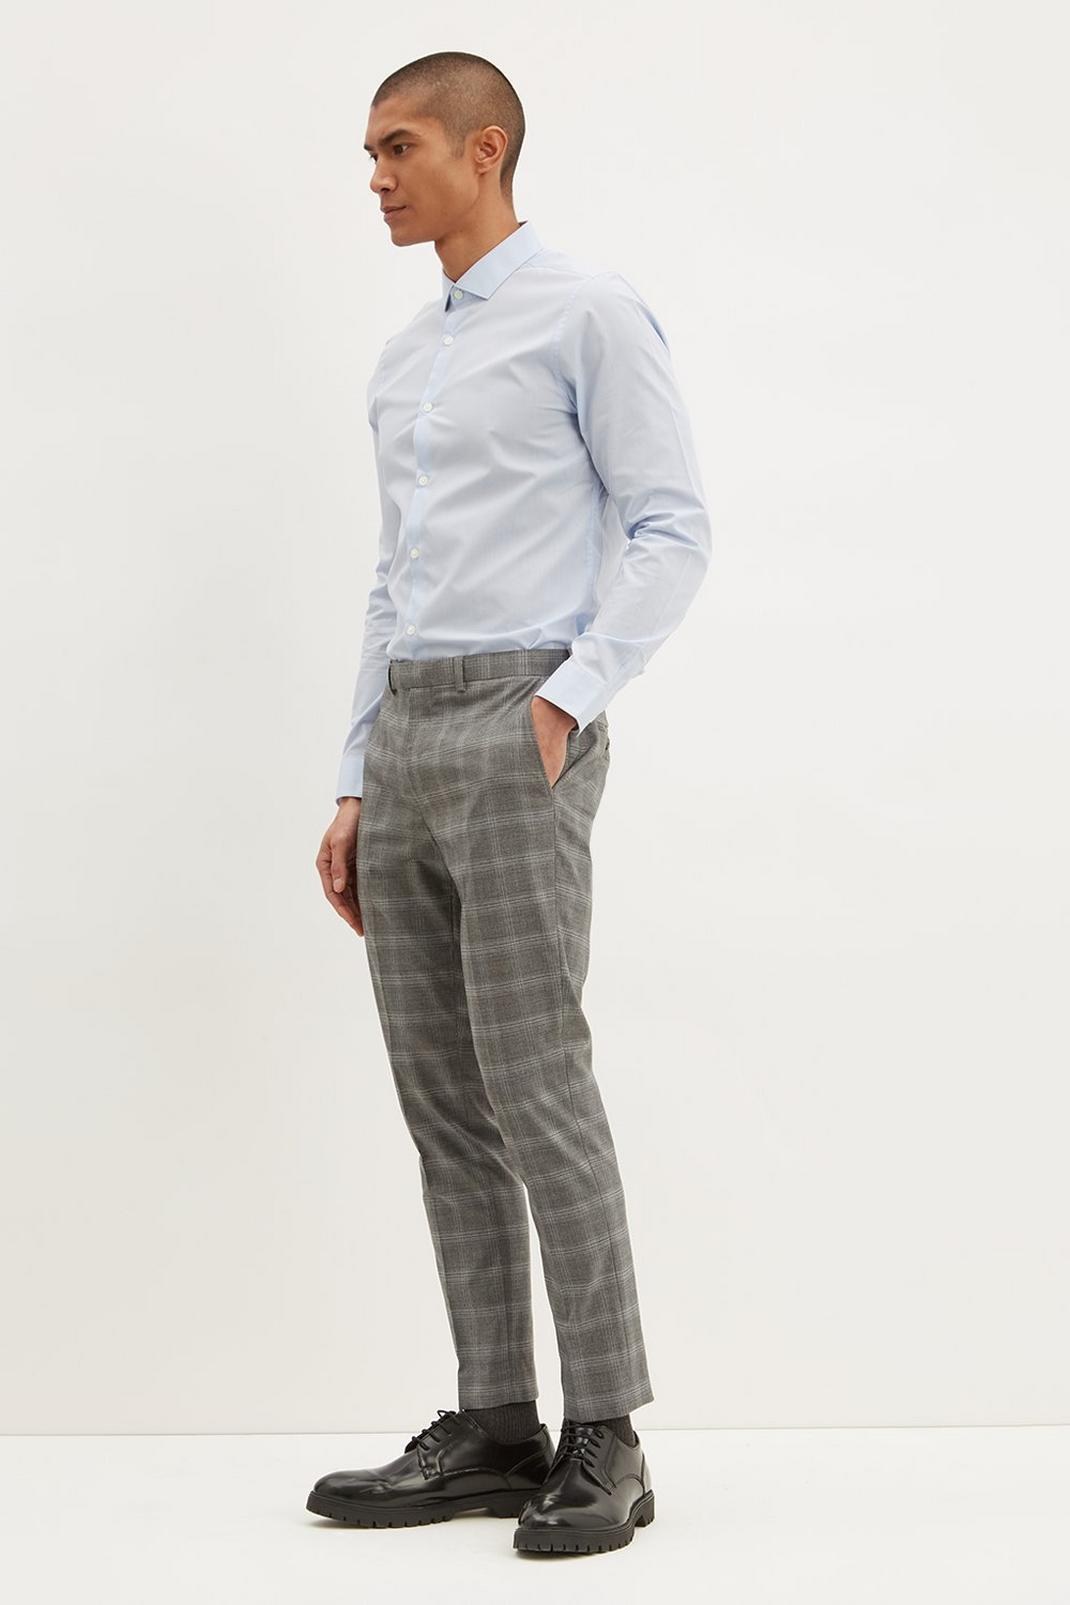 802 Skinny Fit Grey Fine Check Trouser image number 1